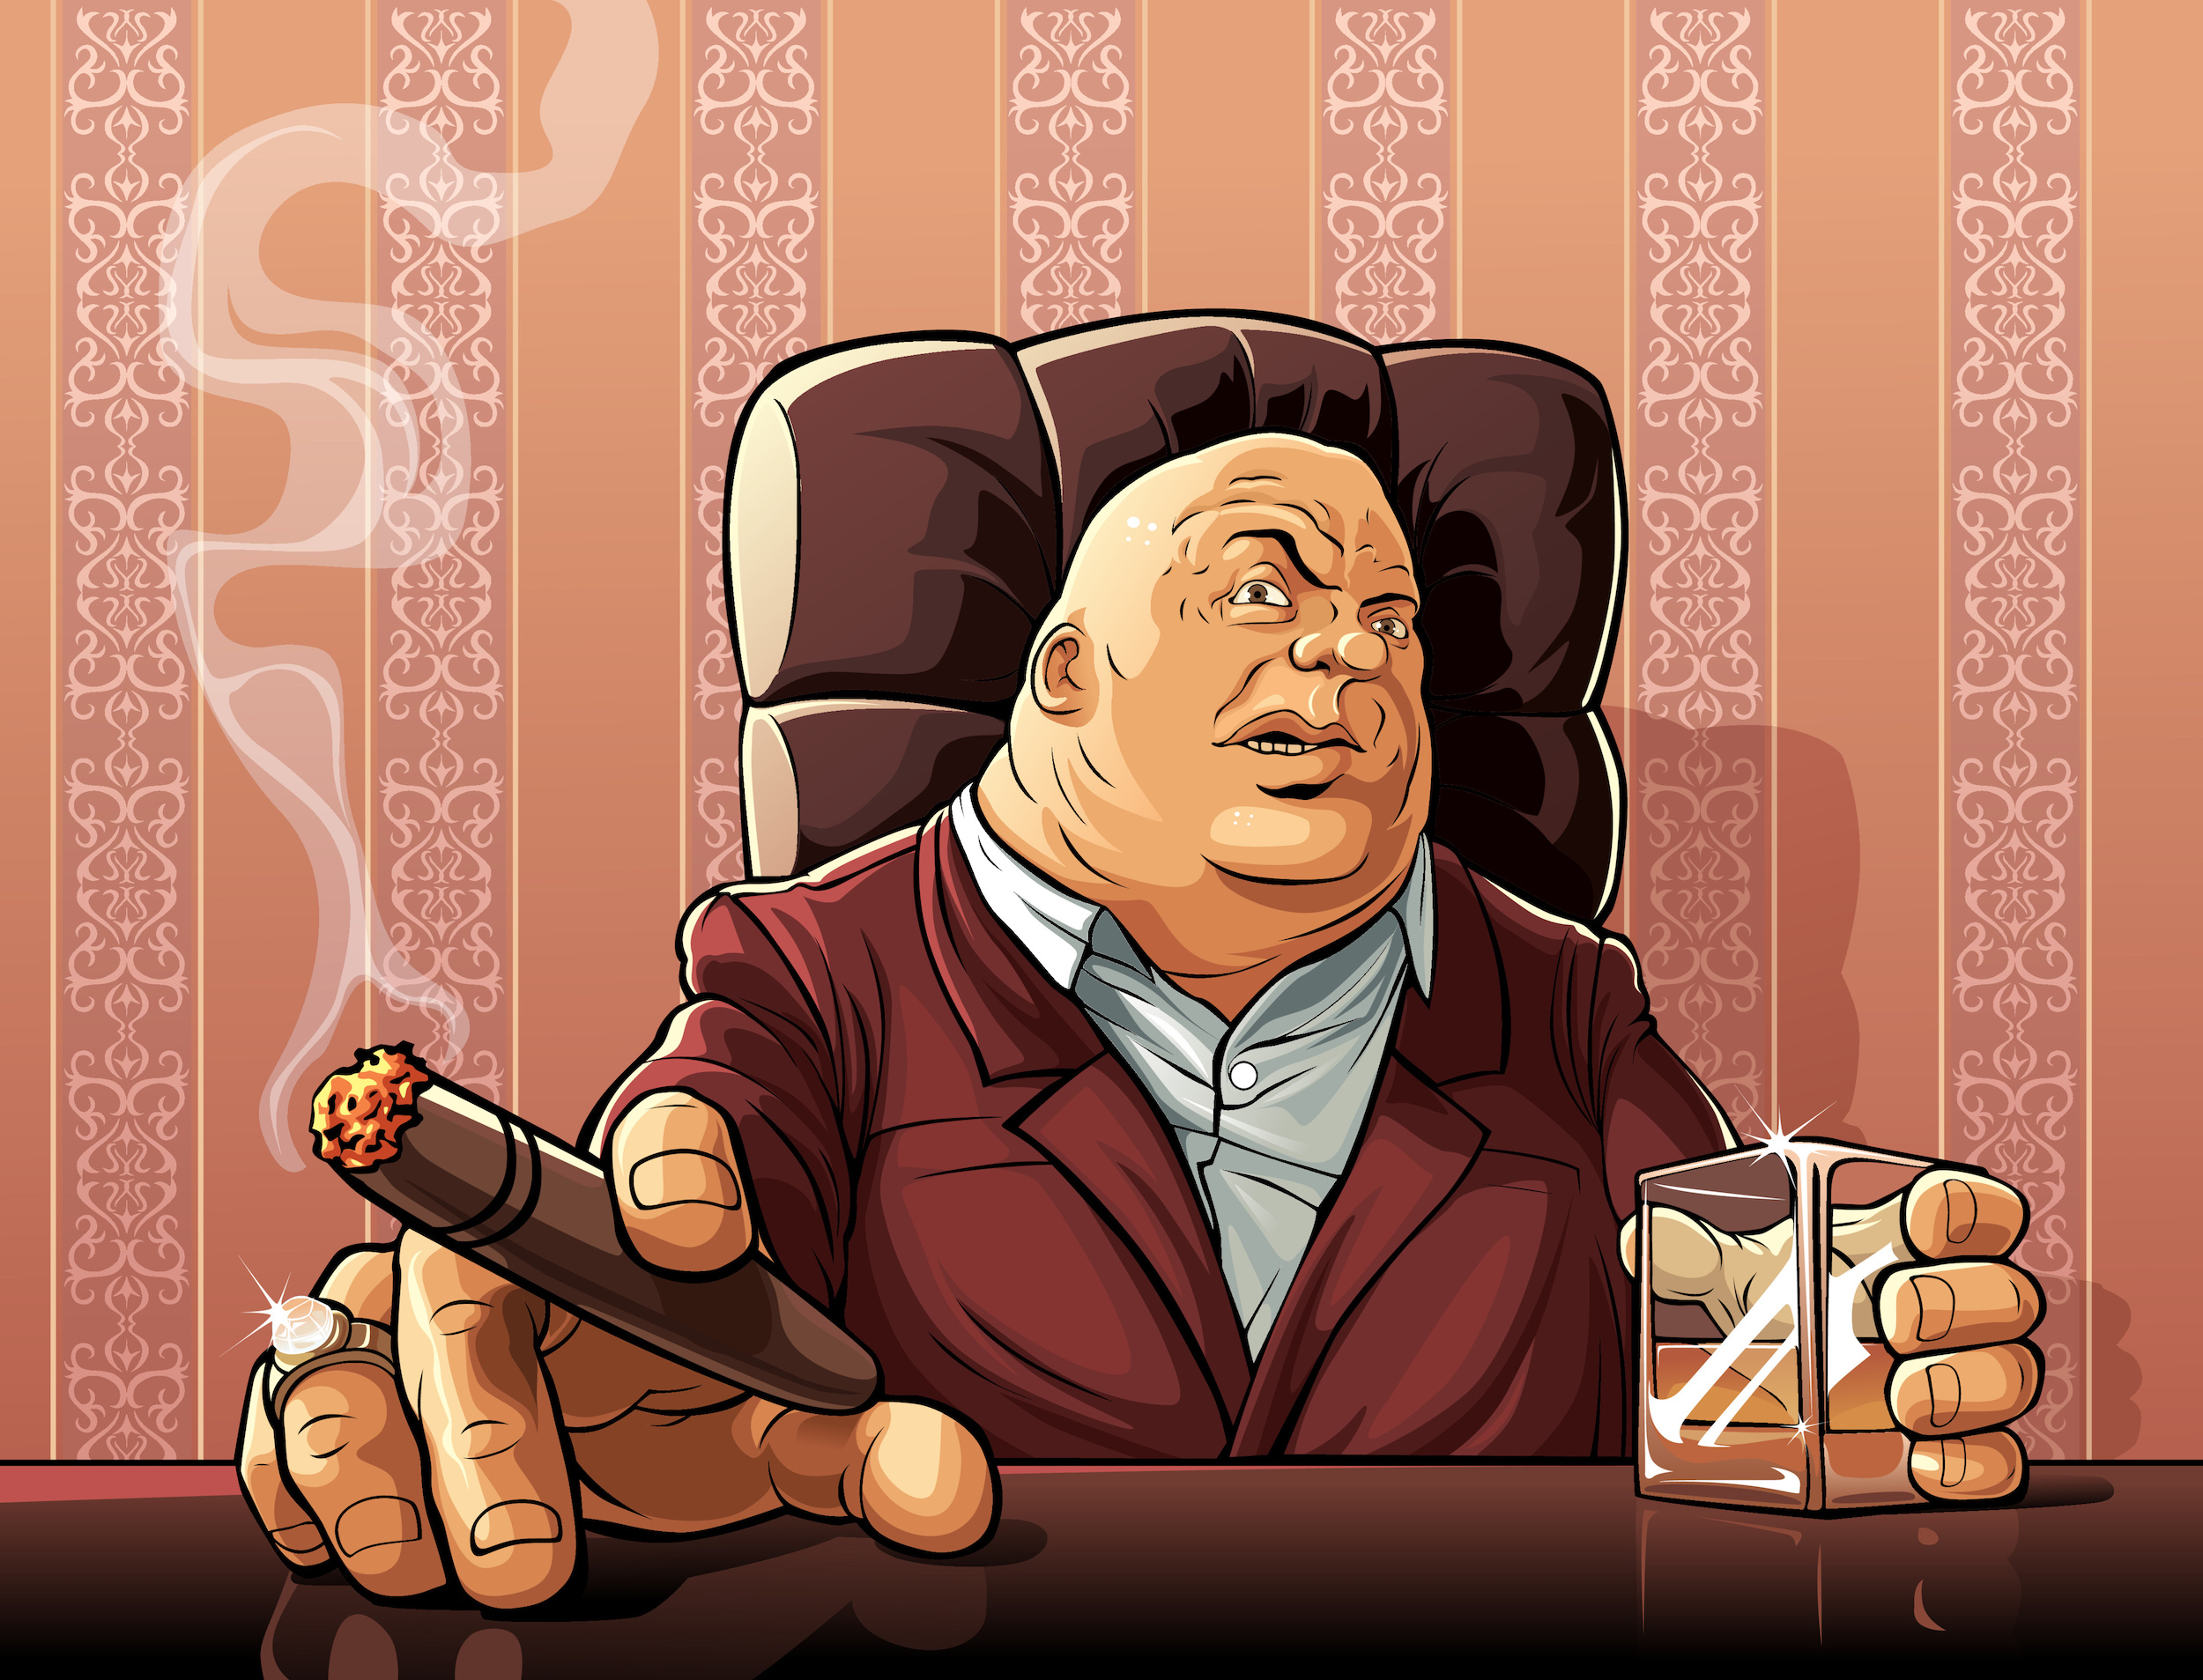 Cartoon graphic showing a man with a ring, smoking a cigar, and enjoying wine in a square glass